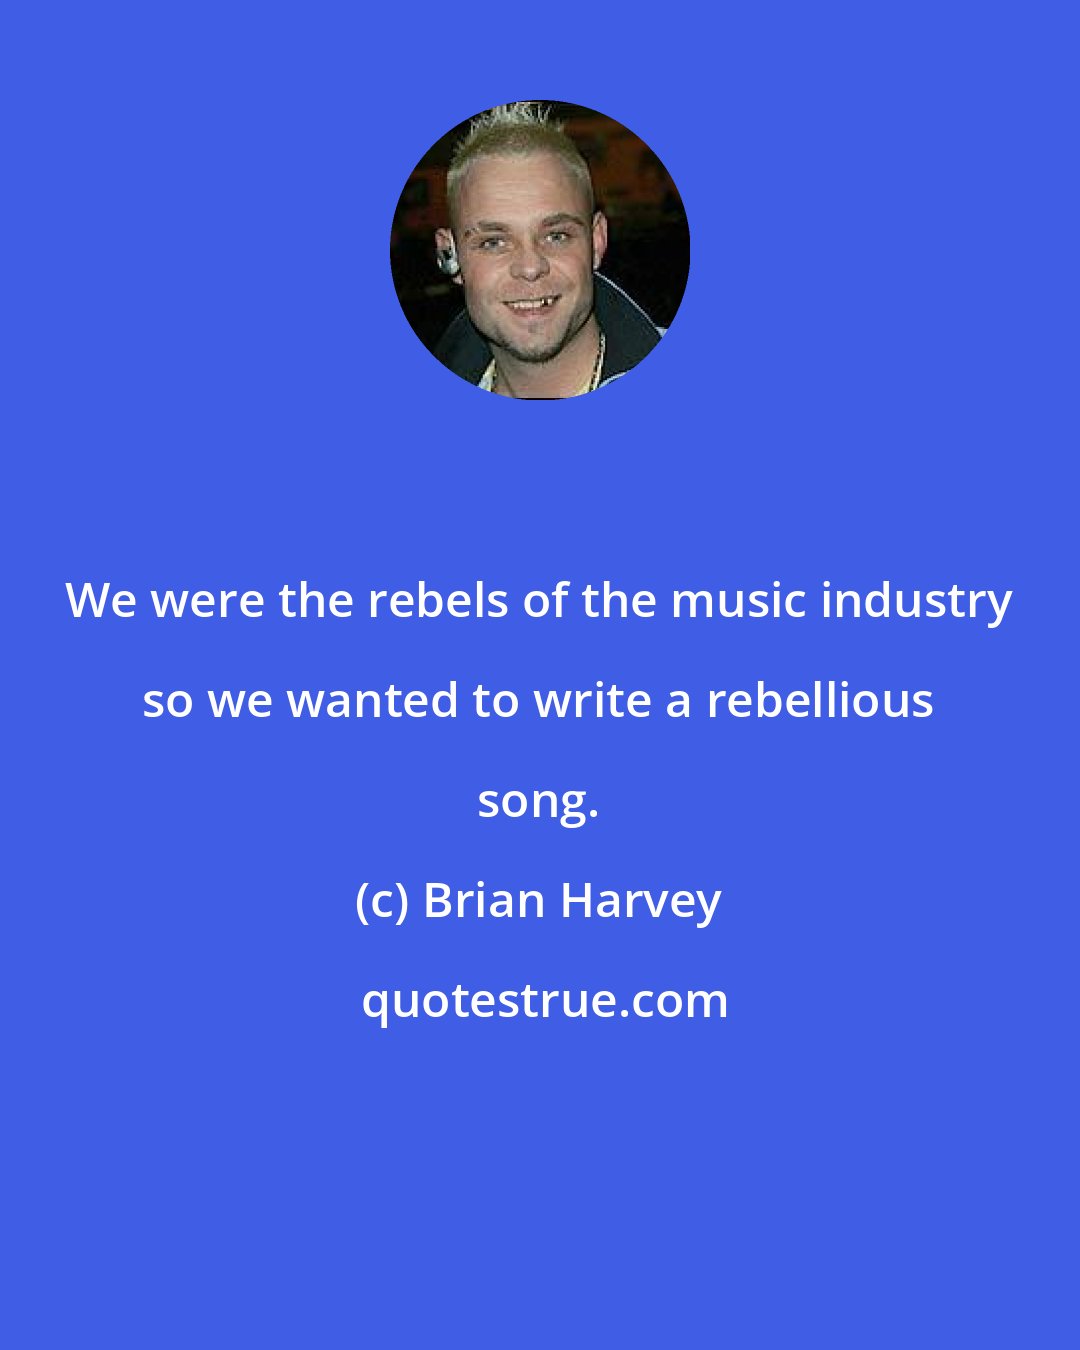 Brian Harvey: We were the rebels of the music industry so we wanted to write a rebellious song.